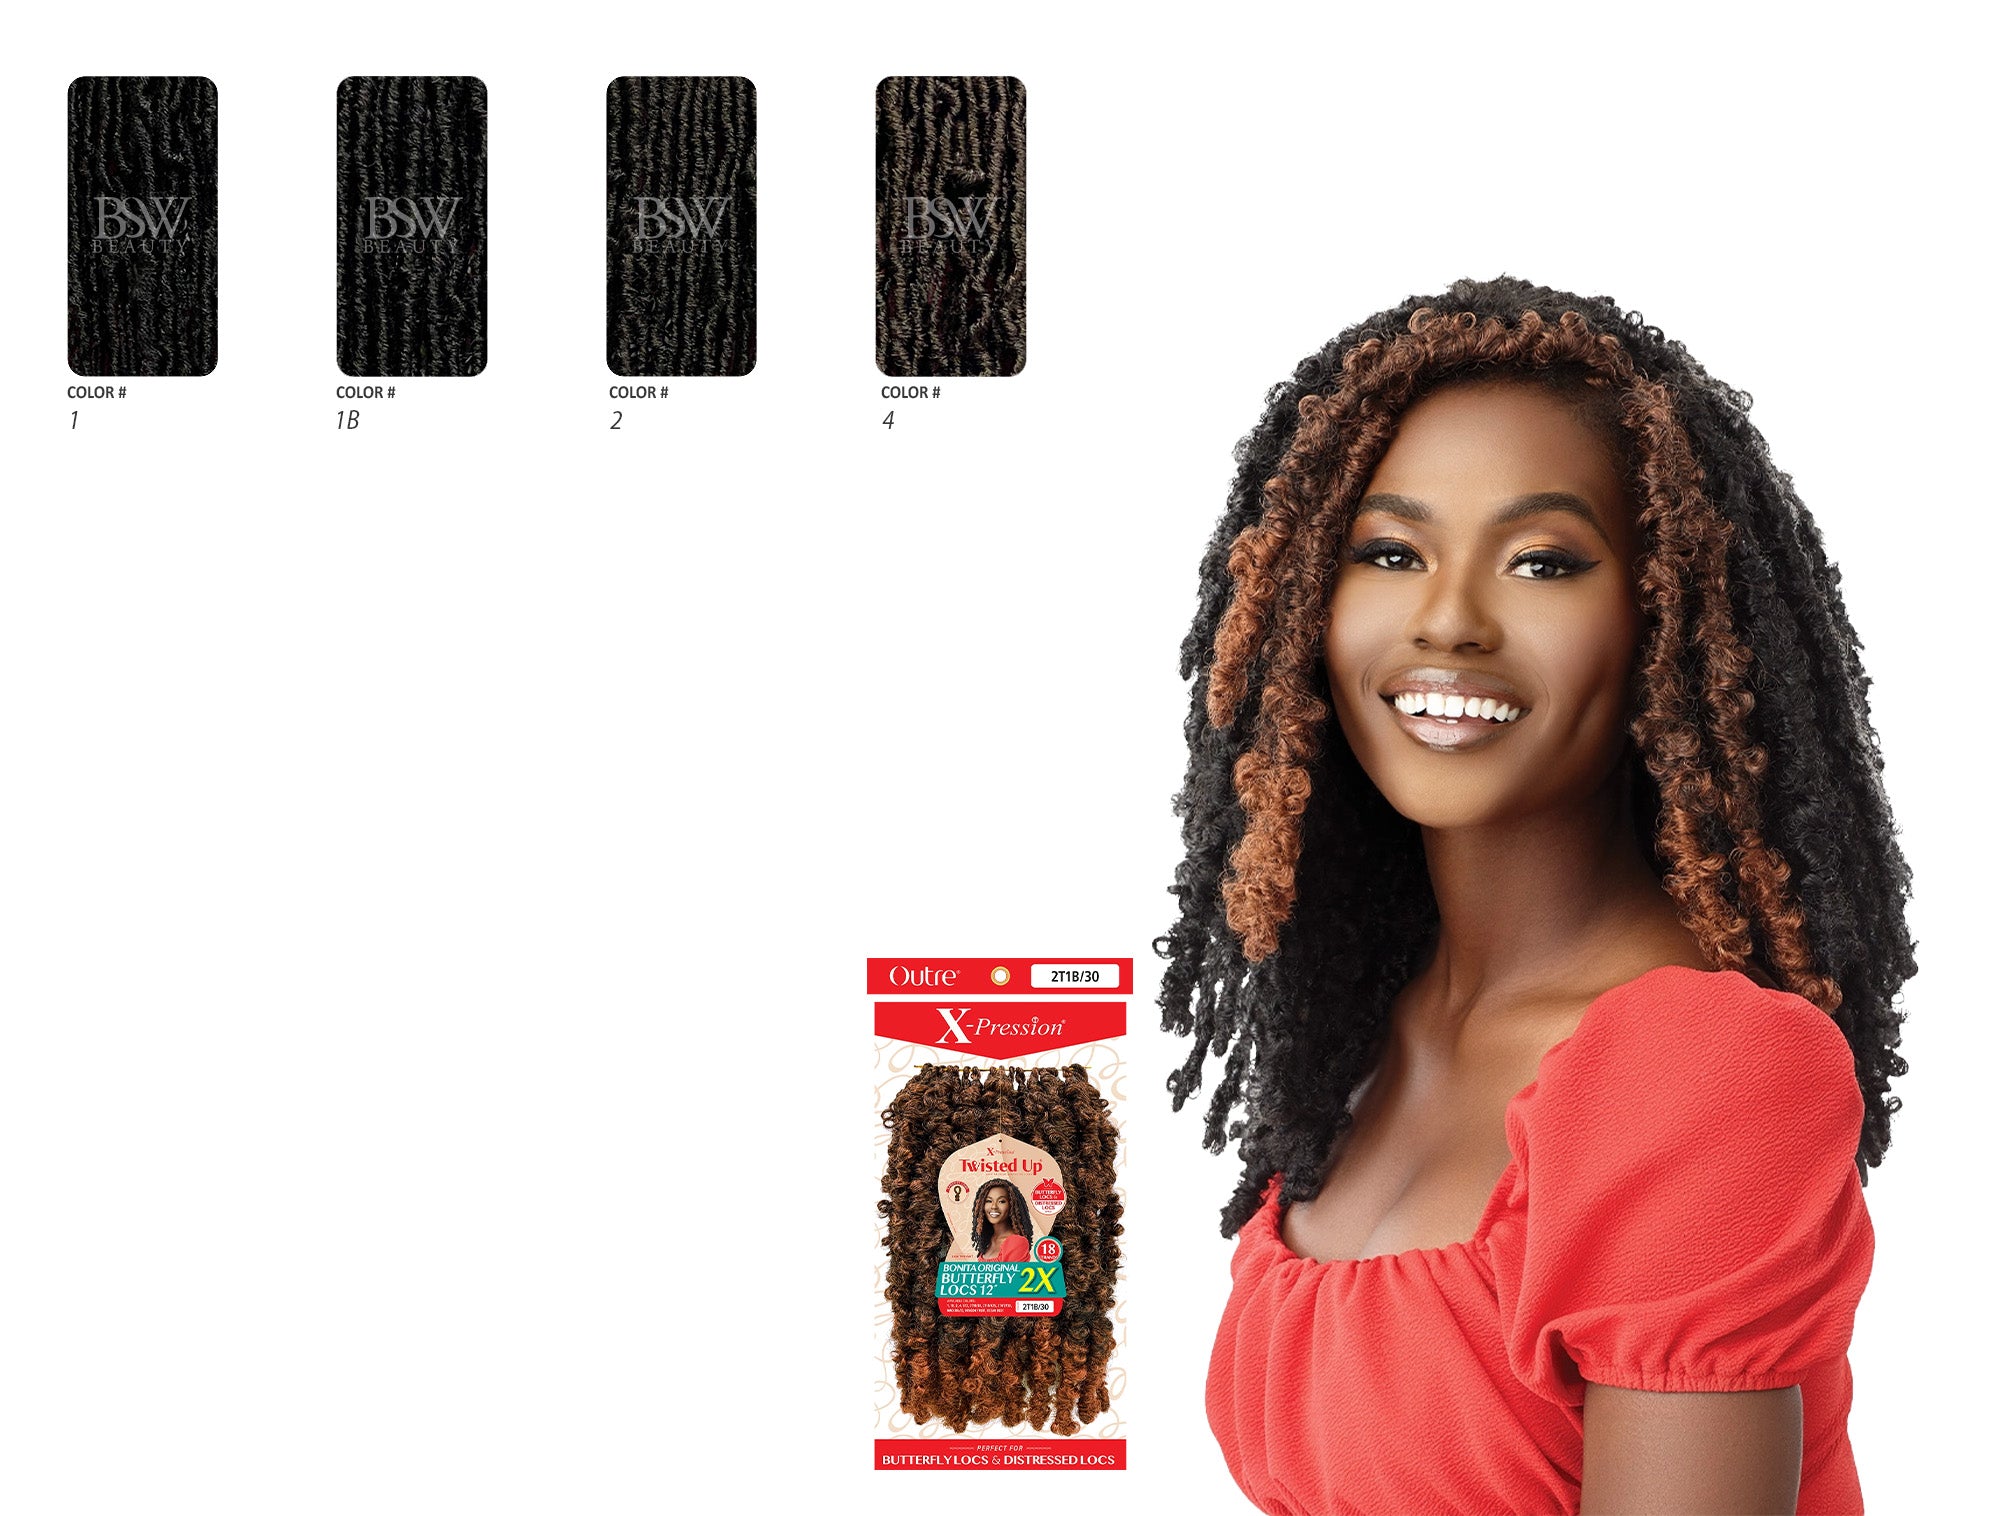 Closure Archives - Canada wide beauty supply online store for wigs, braids,  weaves, extensions, cosmetics, beauty applinaces, and beauty cares